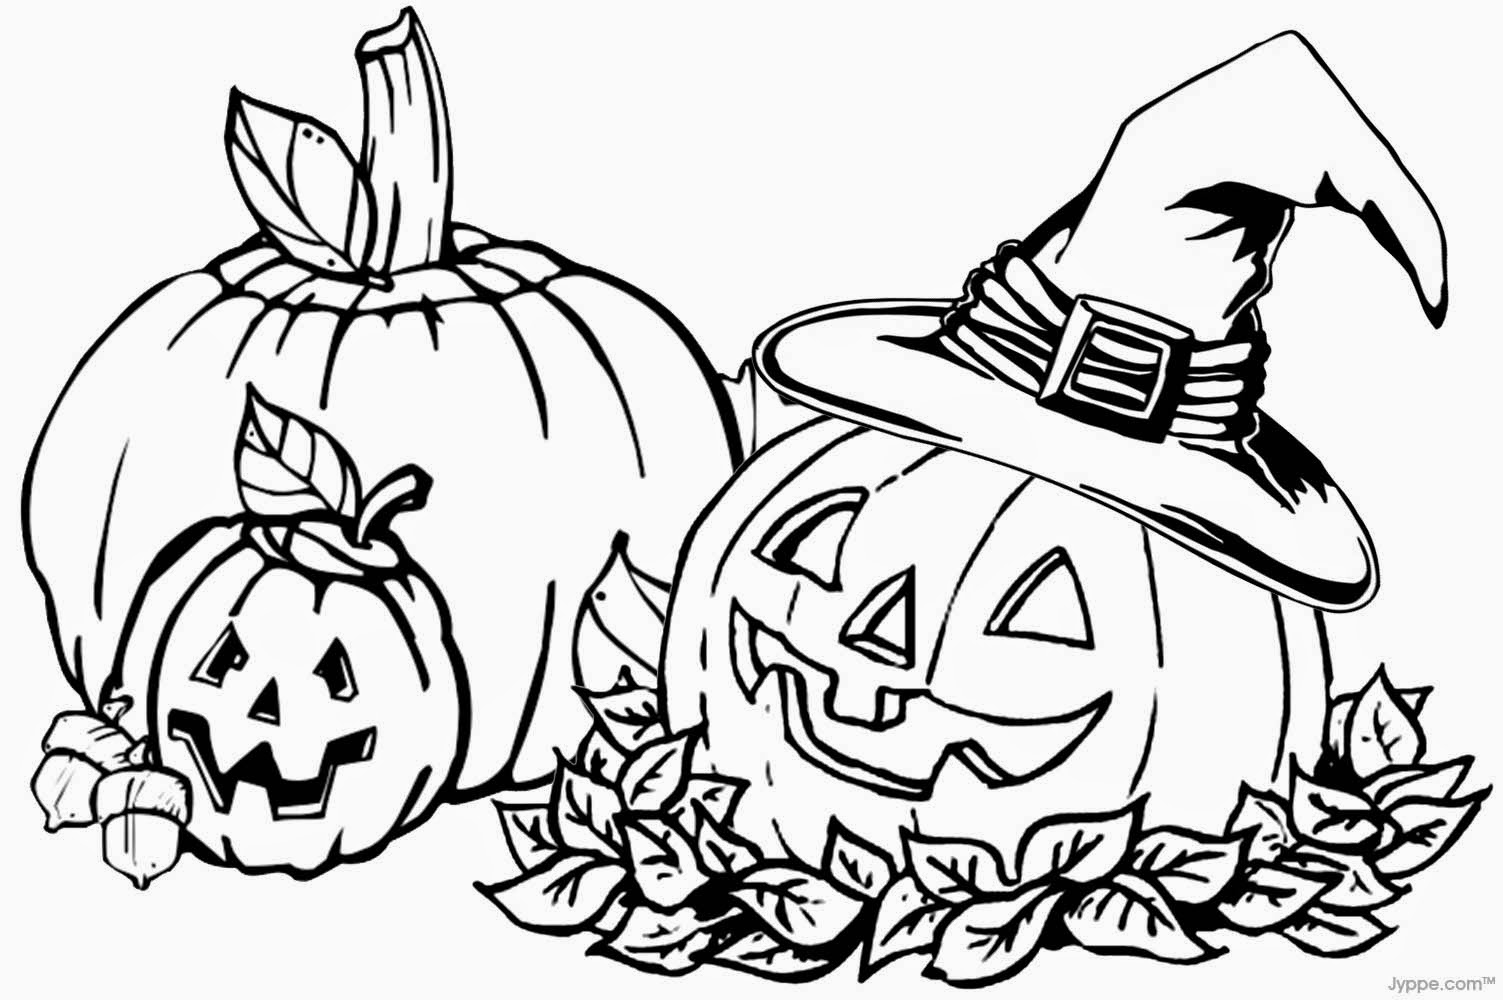 Jack O Lantern Coloring Pages - Coloring Pages Kids